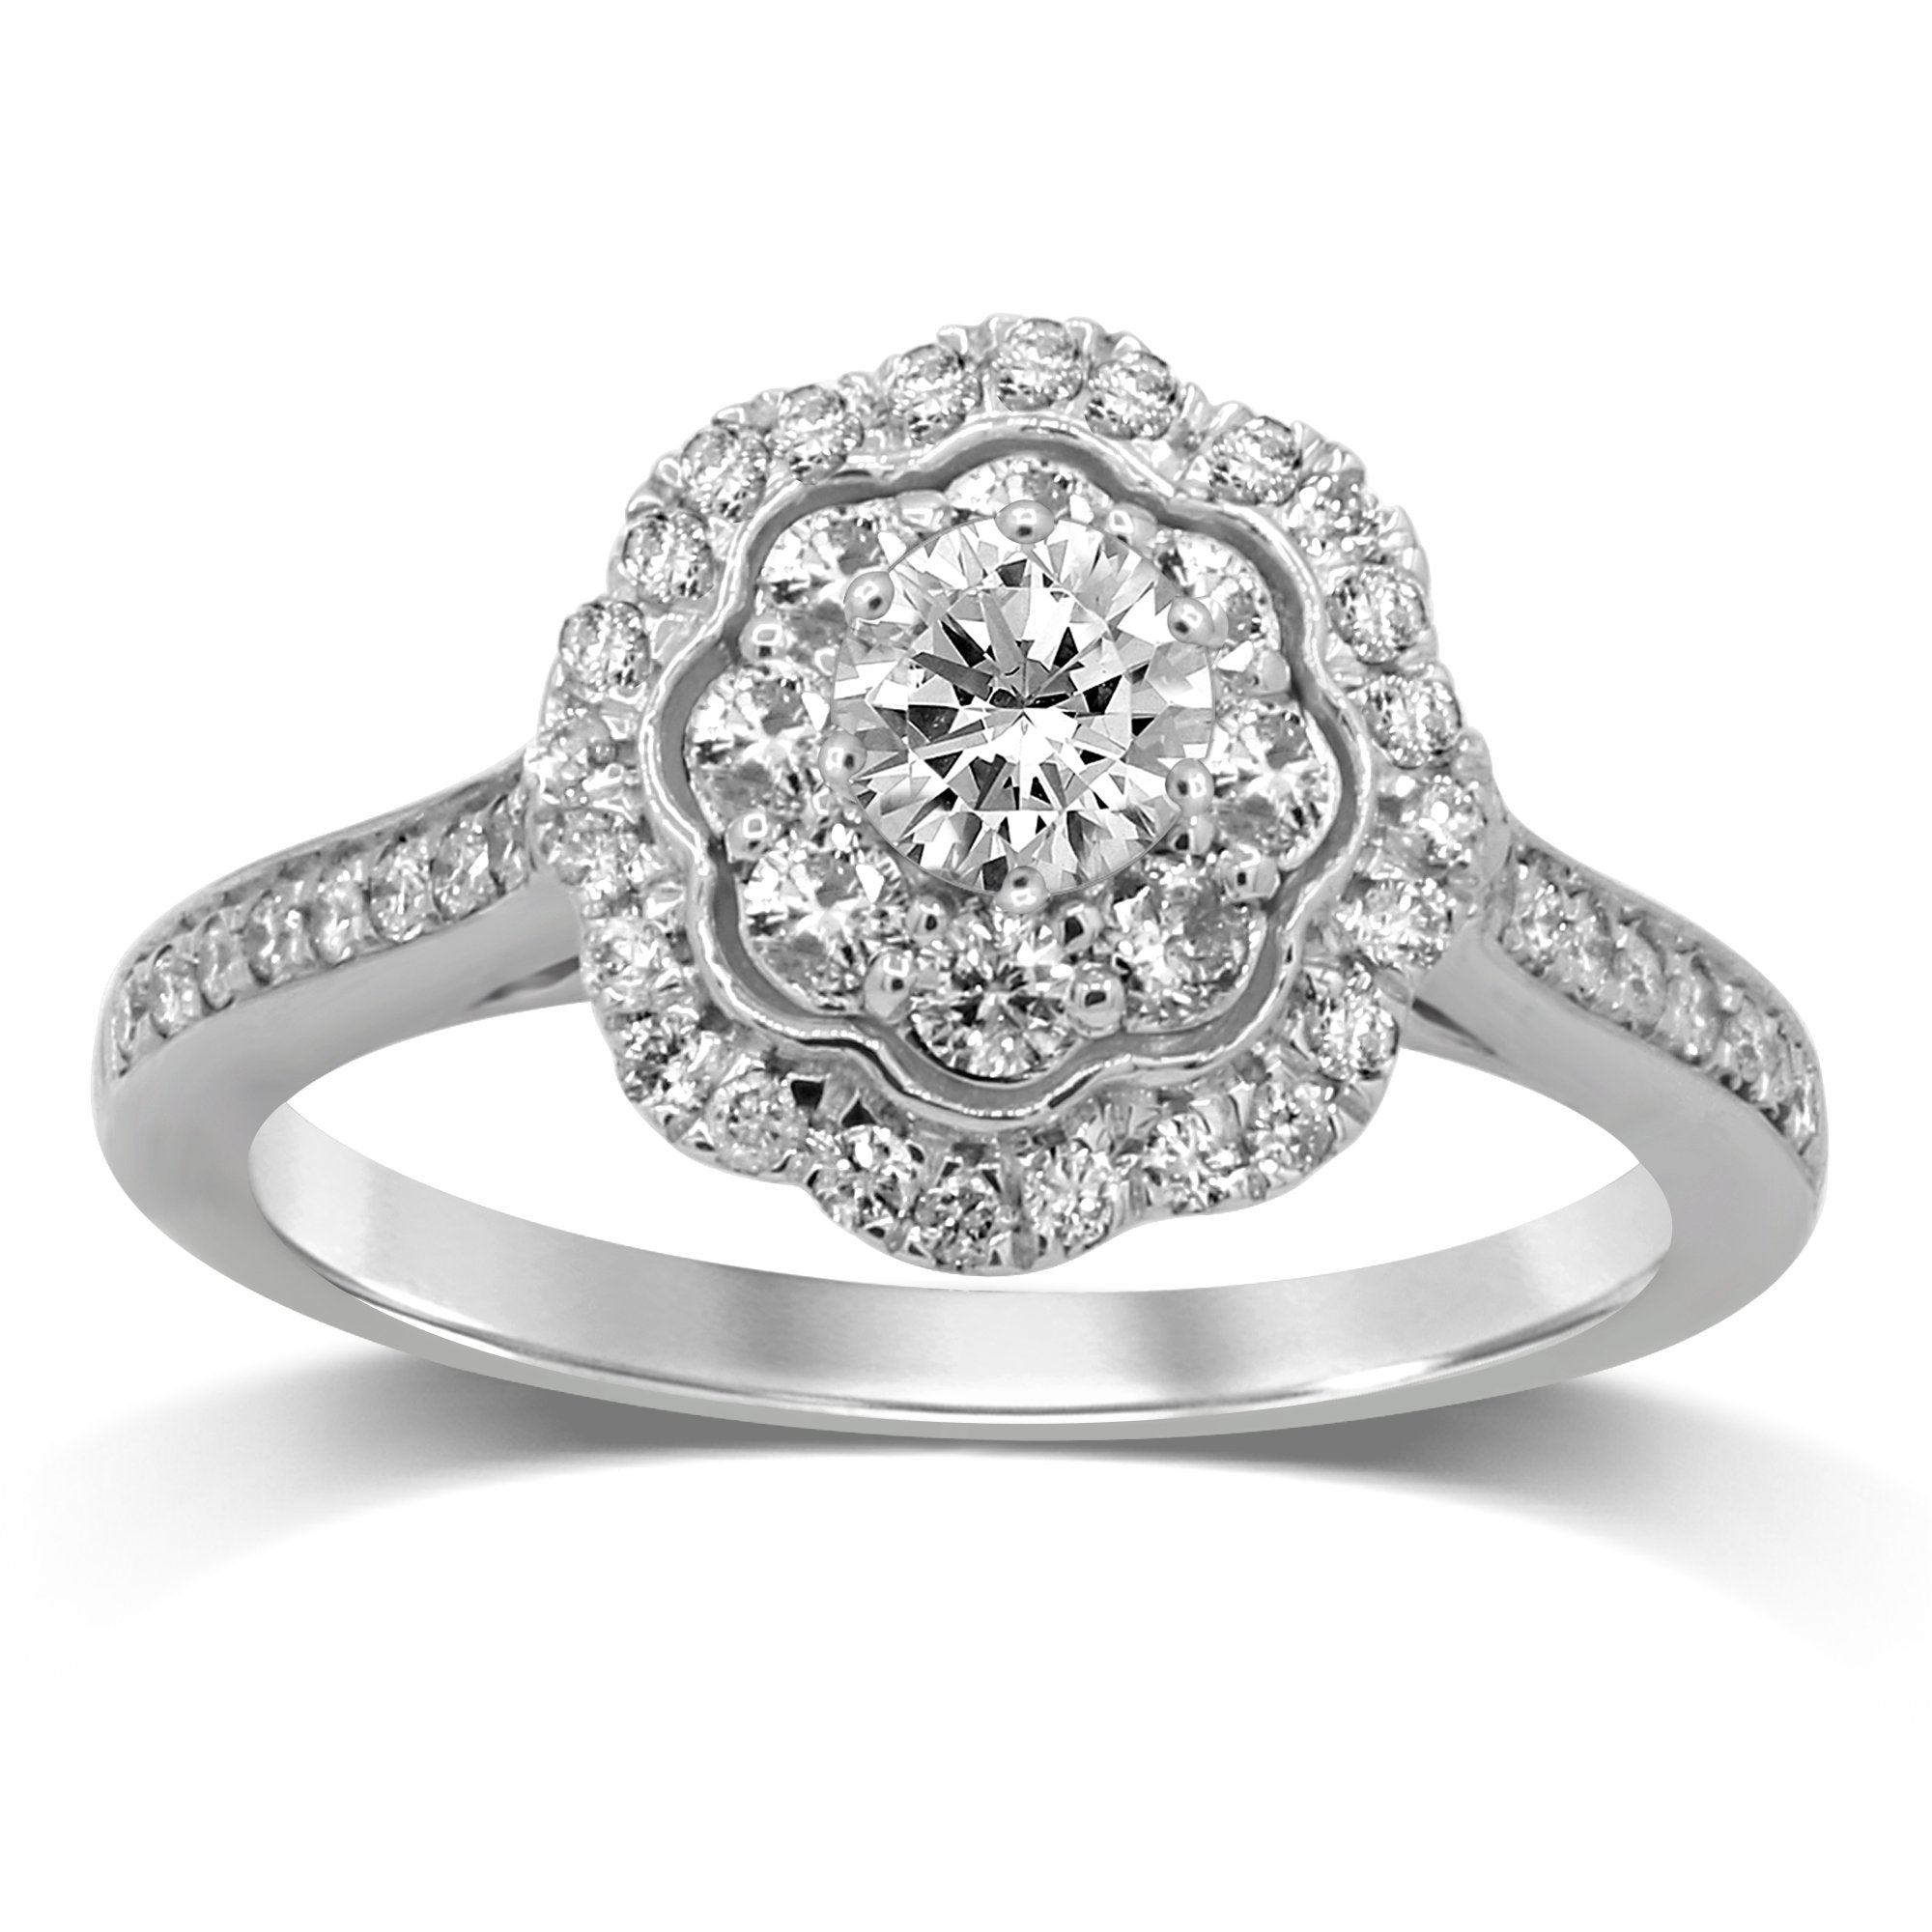 Soft Halo Solitaire Ring with 1/2ct of Diamonds in 18ct White Gold Rings Bevilles 